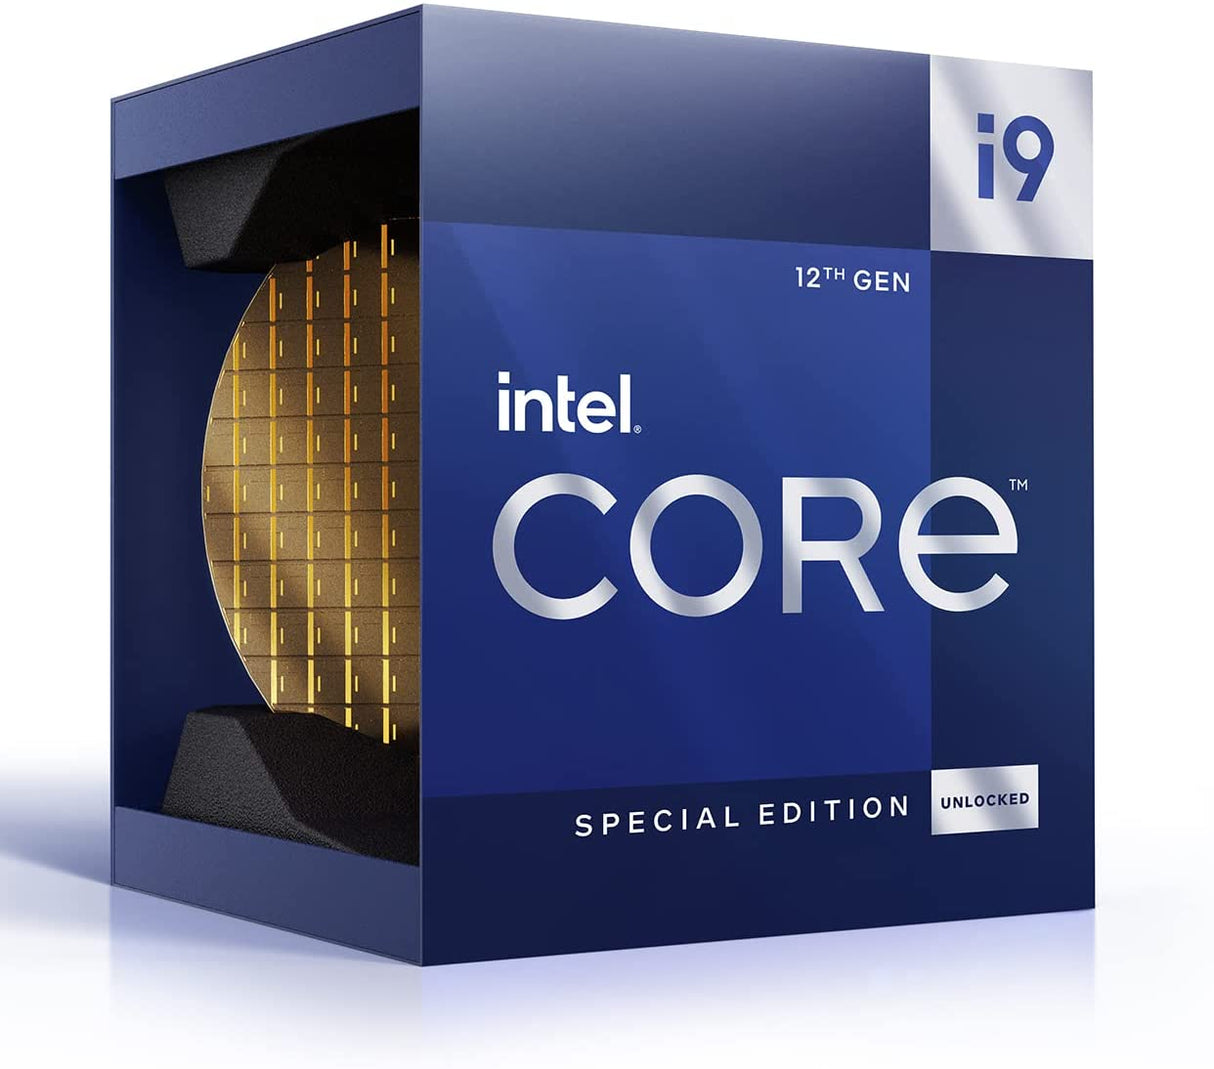 Intel Core i9-12900KS Desktop Processor 16 (8P+8E) Cores Up to 5.5 GHz with Intel Thermal Velocity Boost, featuring Intel Adaptive Boost Technology LGA1700 600 Series Chipset 150W Processor Base Power